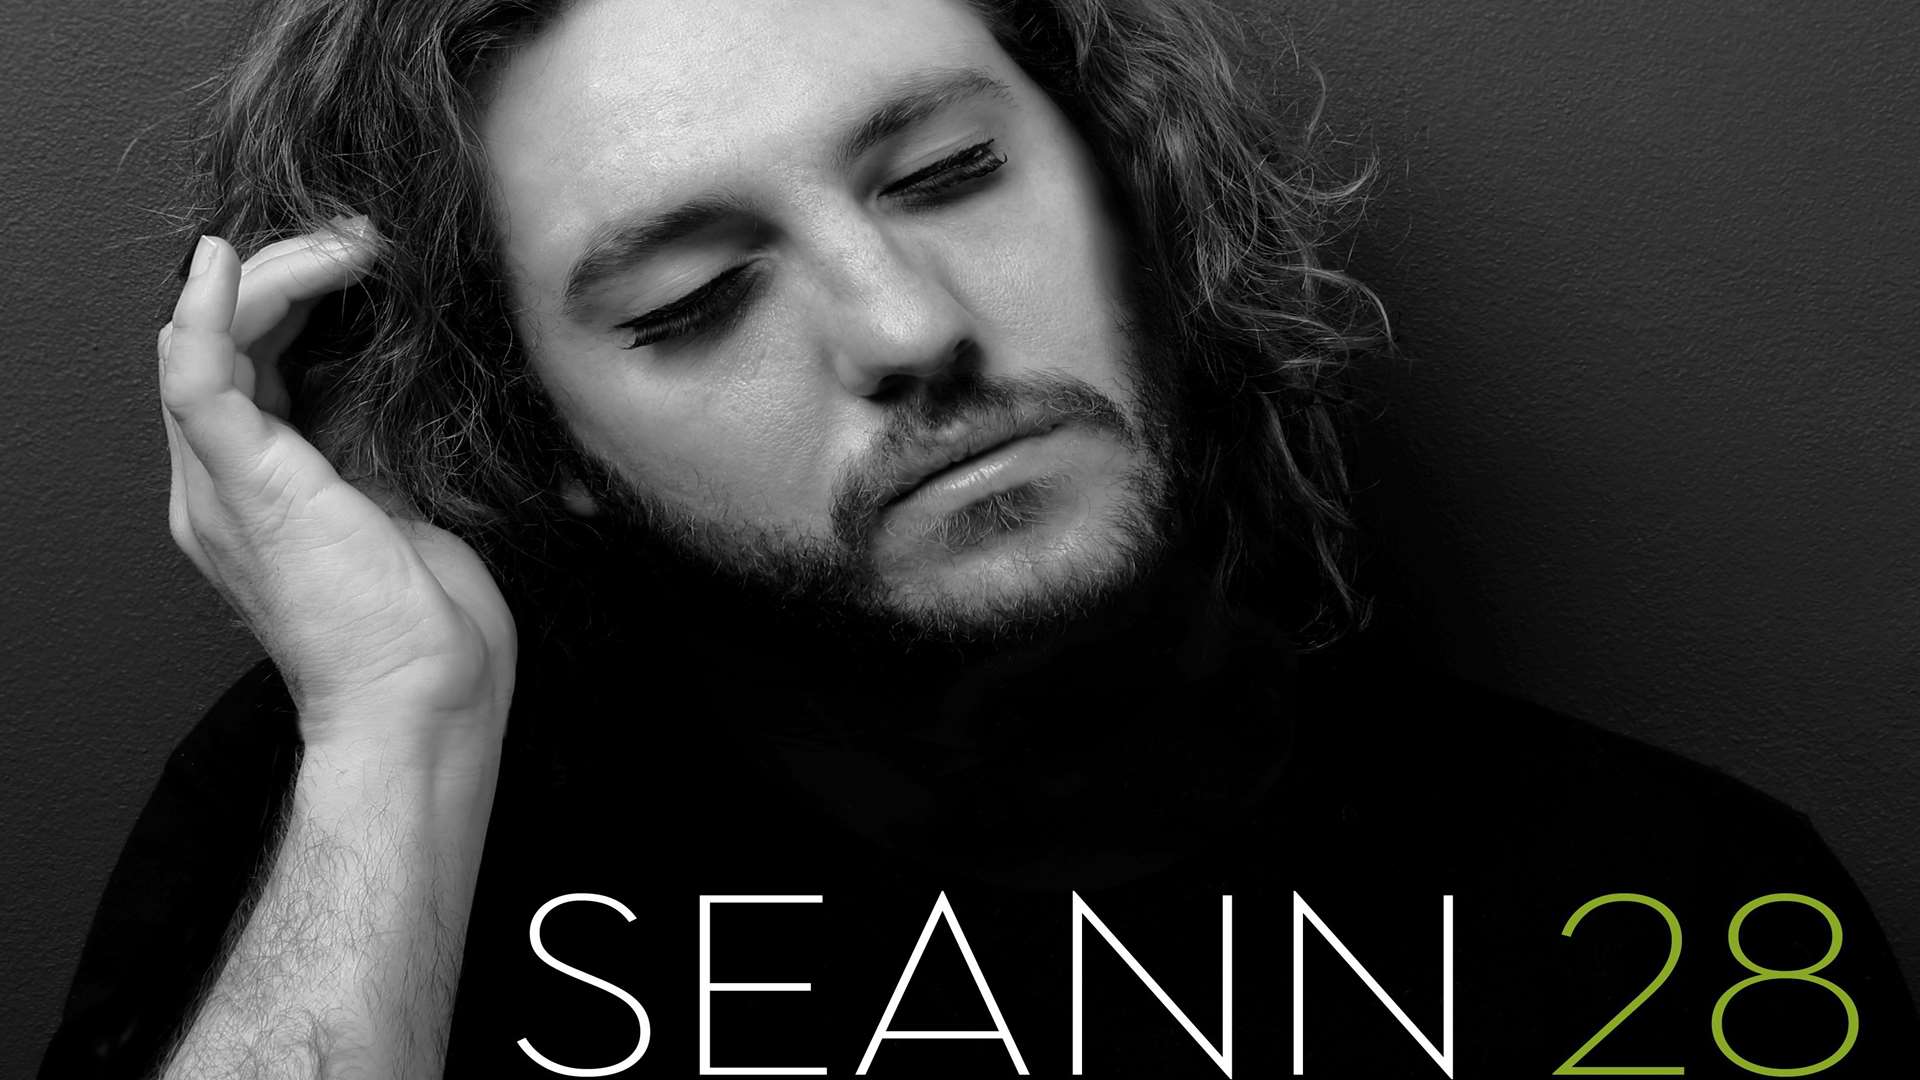 After. The photo for Seann Walsh's 28 tour is a mickey-take of pop star Adele's 21 album cover